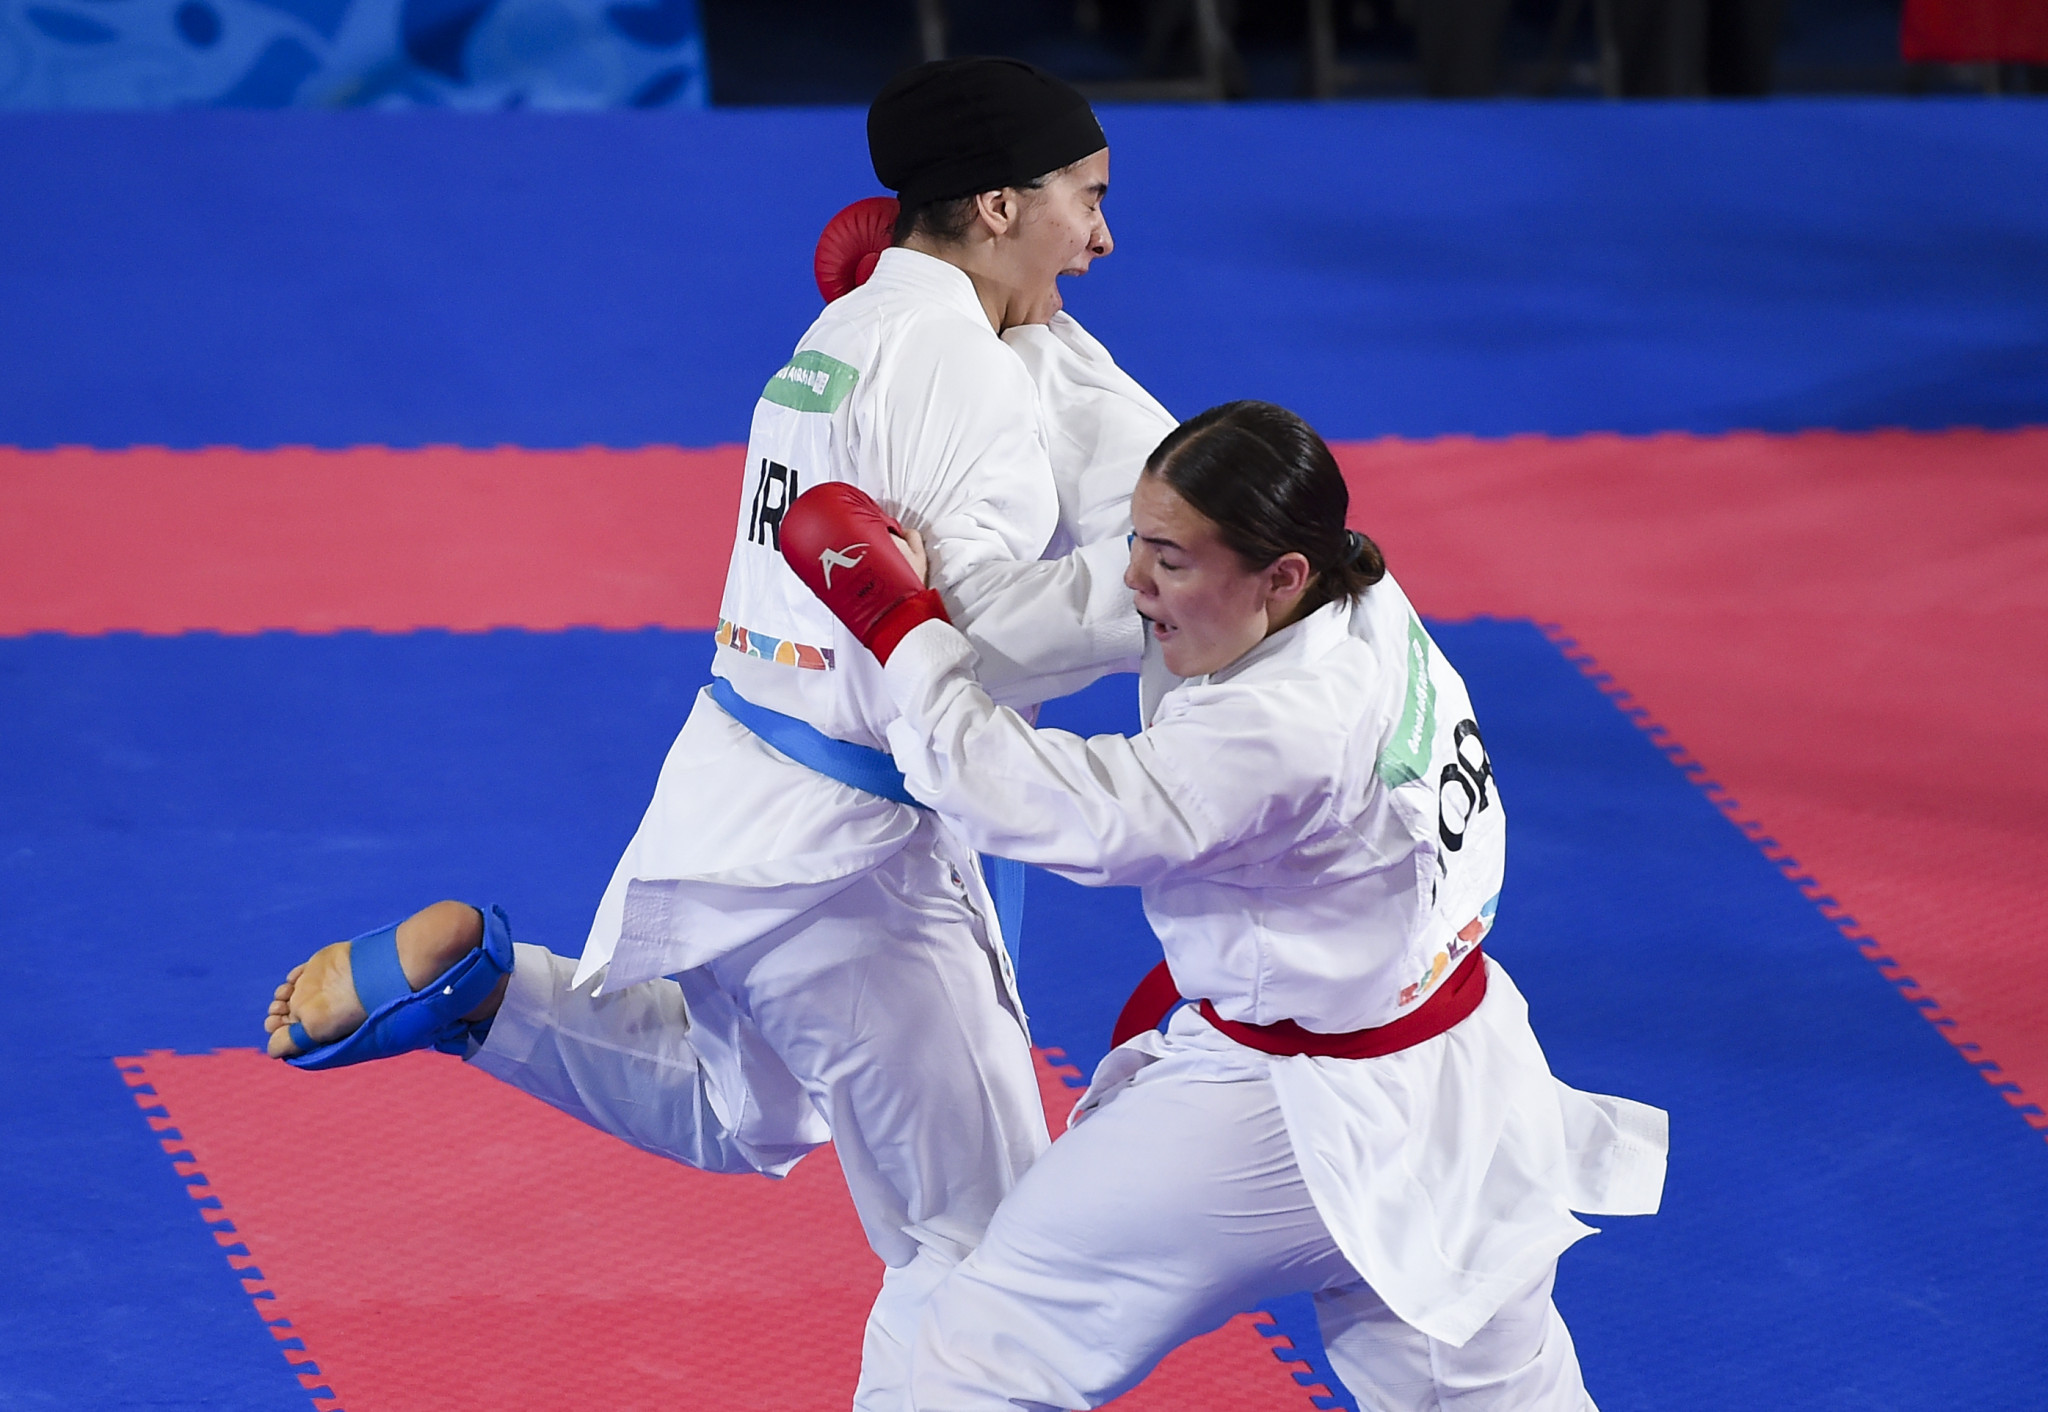 Karate became an associate member of ASOIF after being added to the programme for Tokyo 2020 ©Getty Images